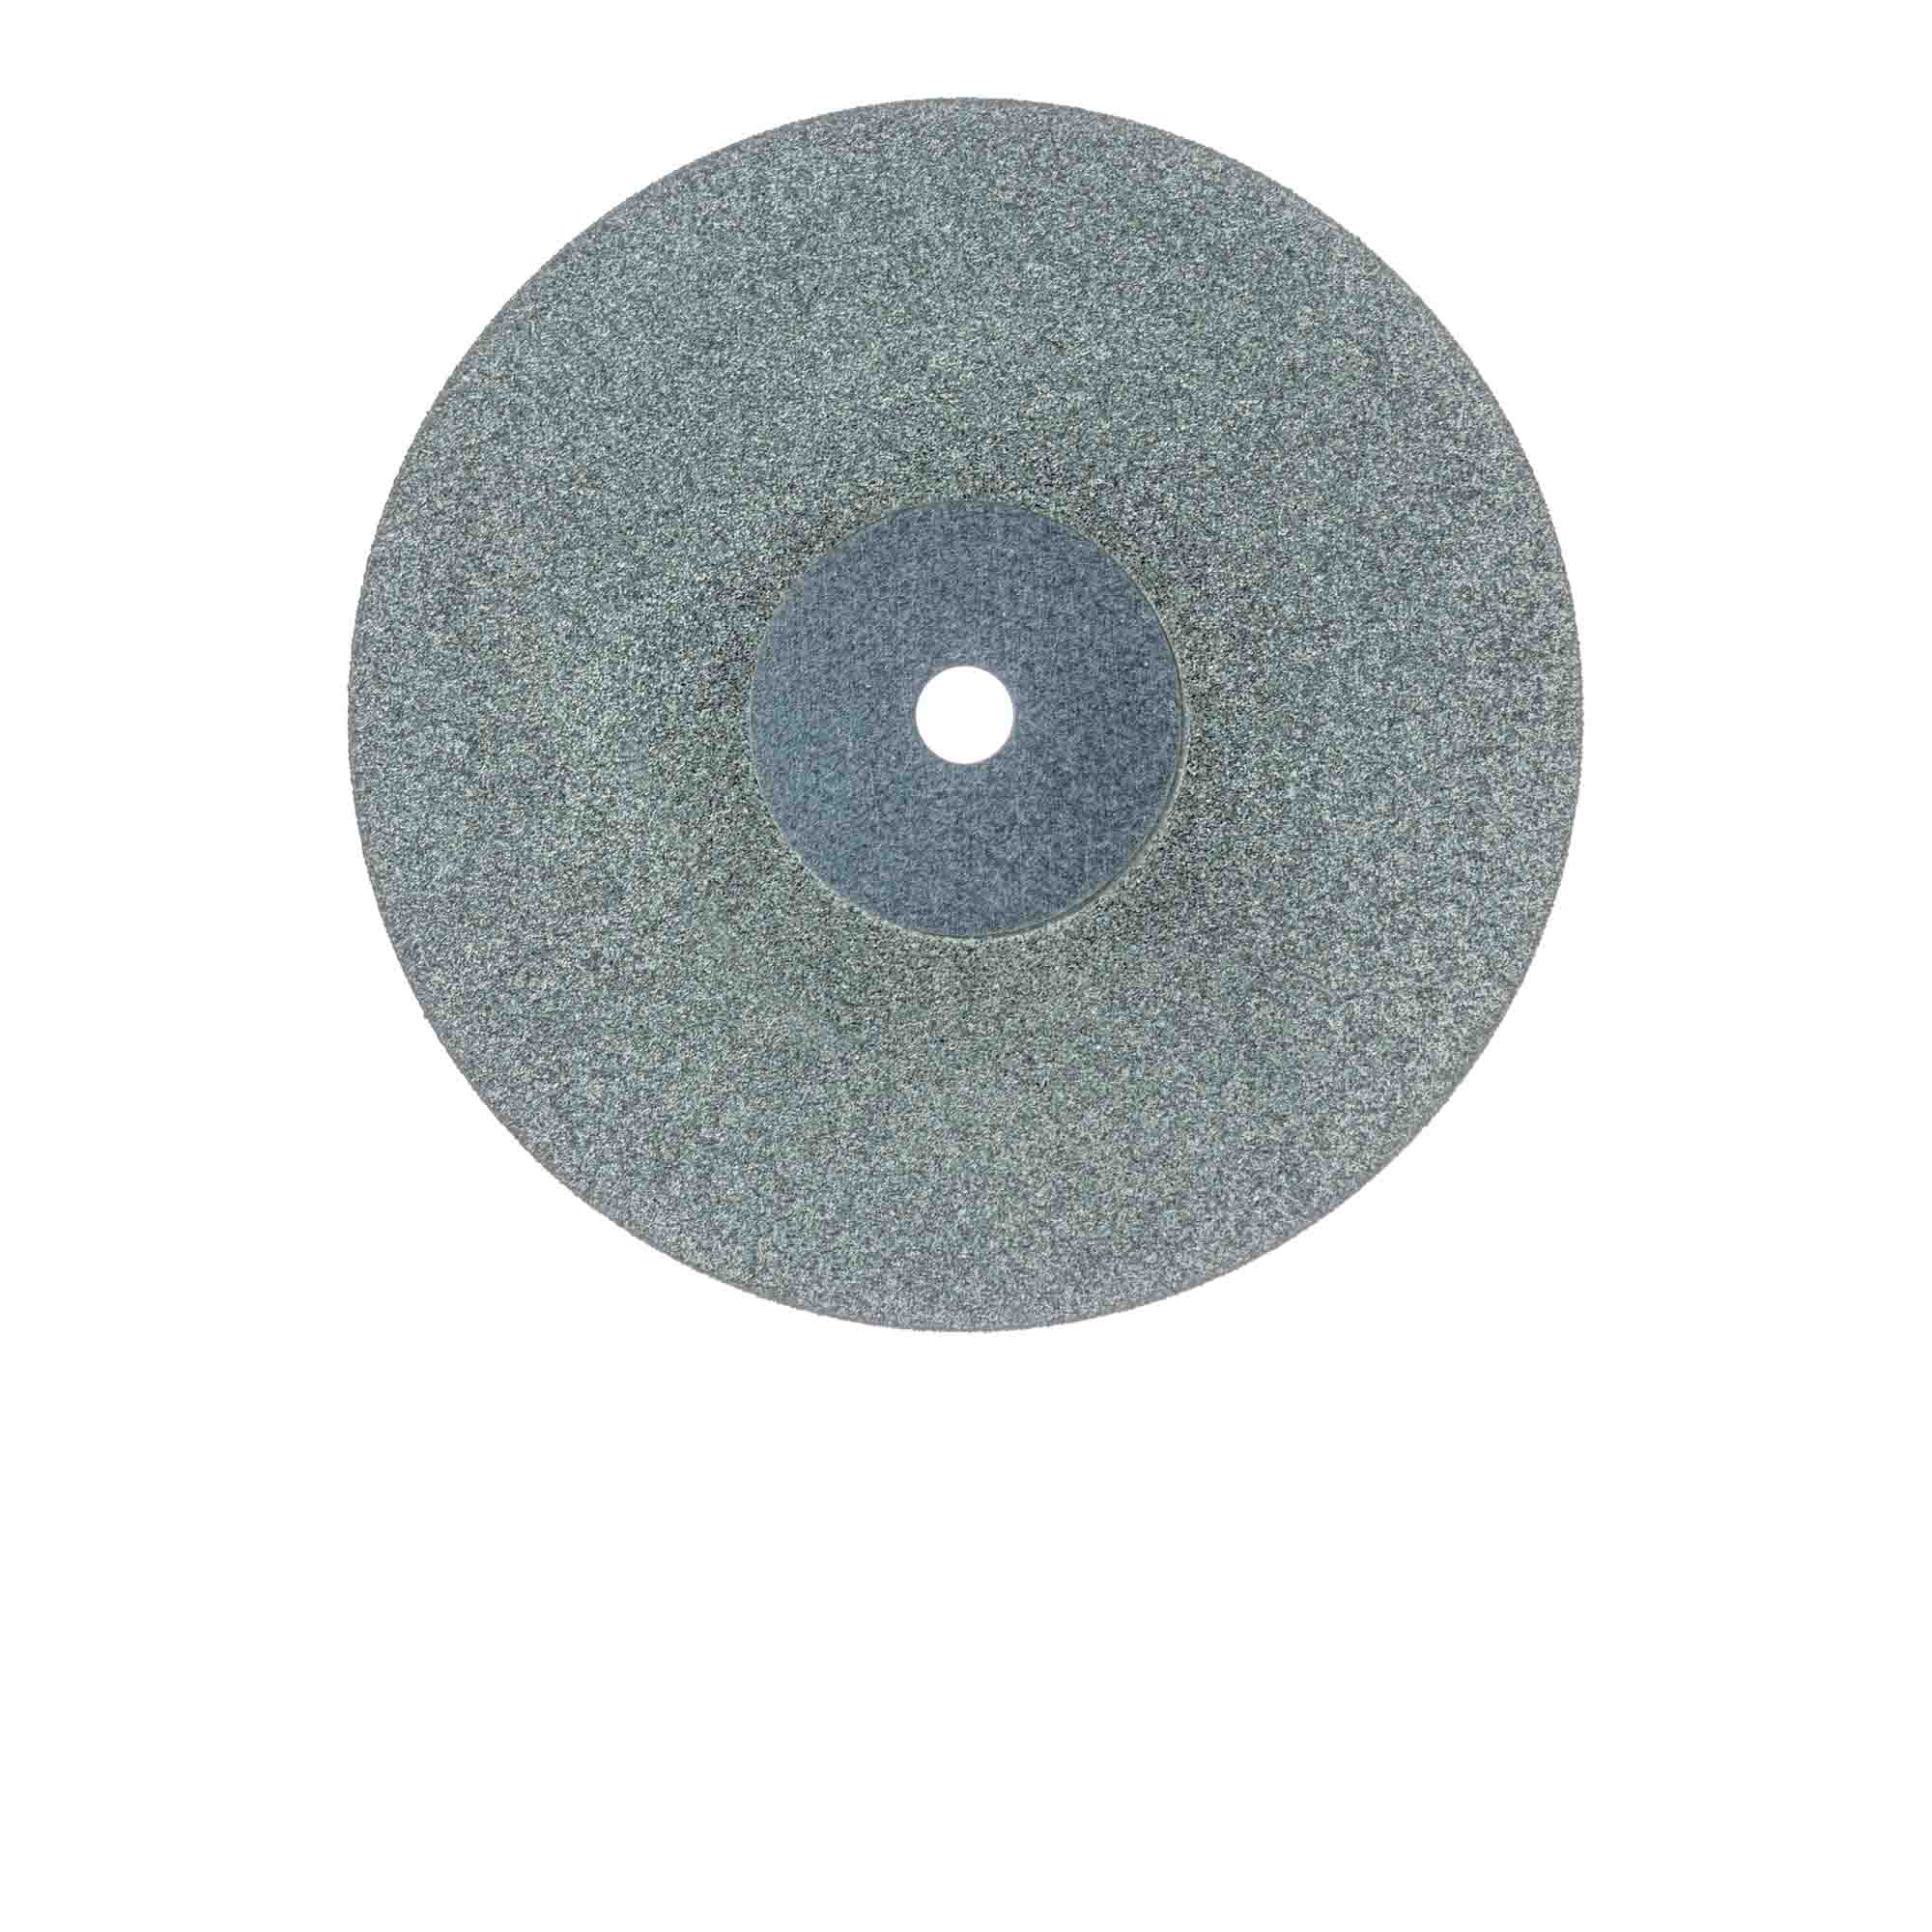 921DC-220-HP Diamond Disc, Double Sided, 0.15mm Thick, 22mm Ø, Extra Fine, HP